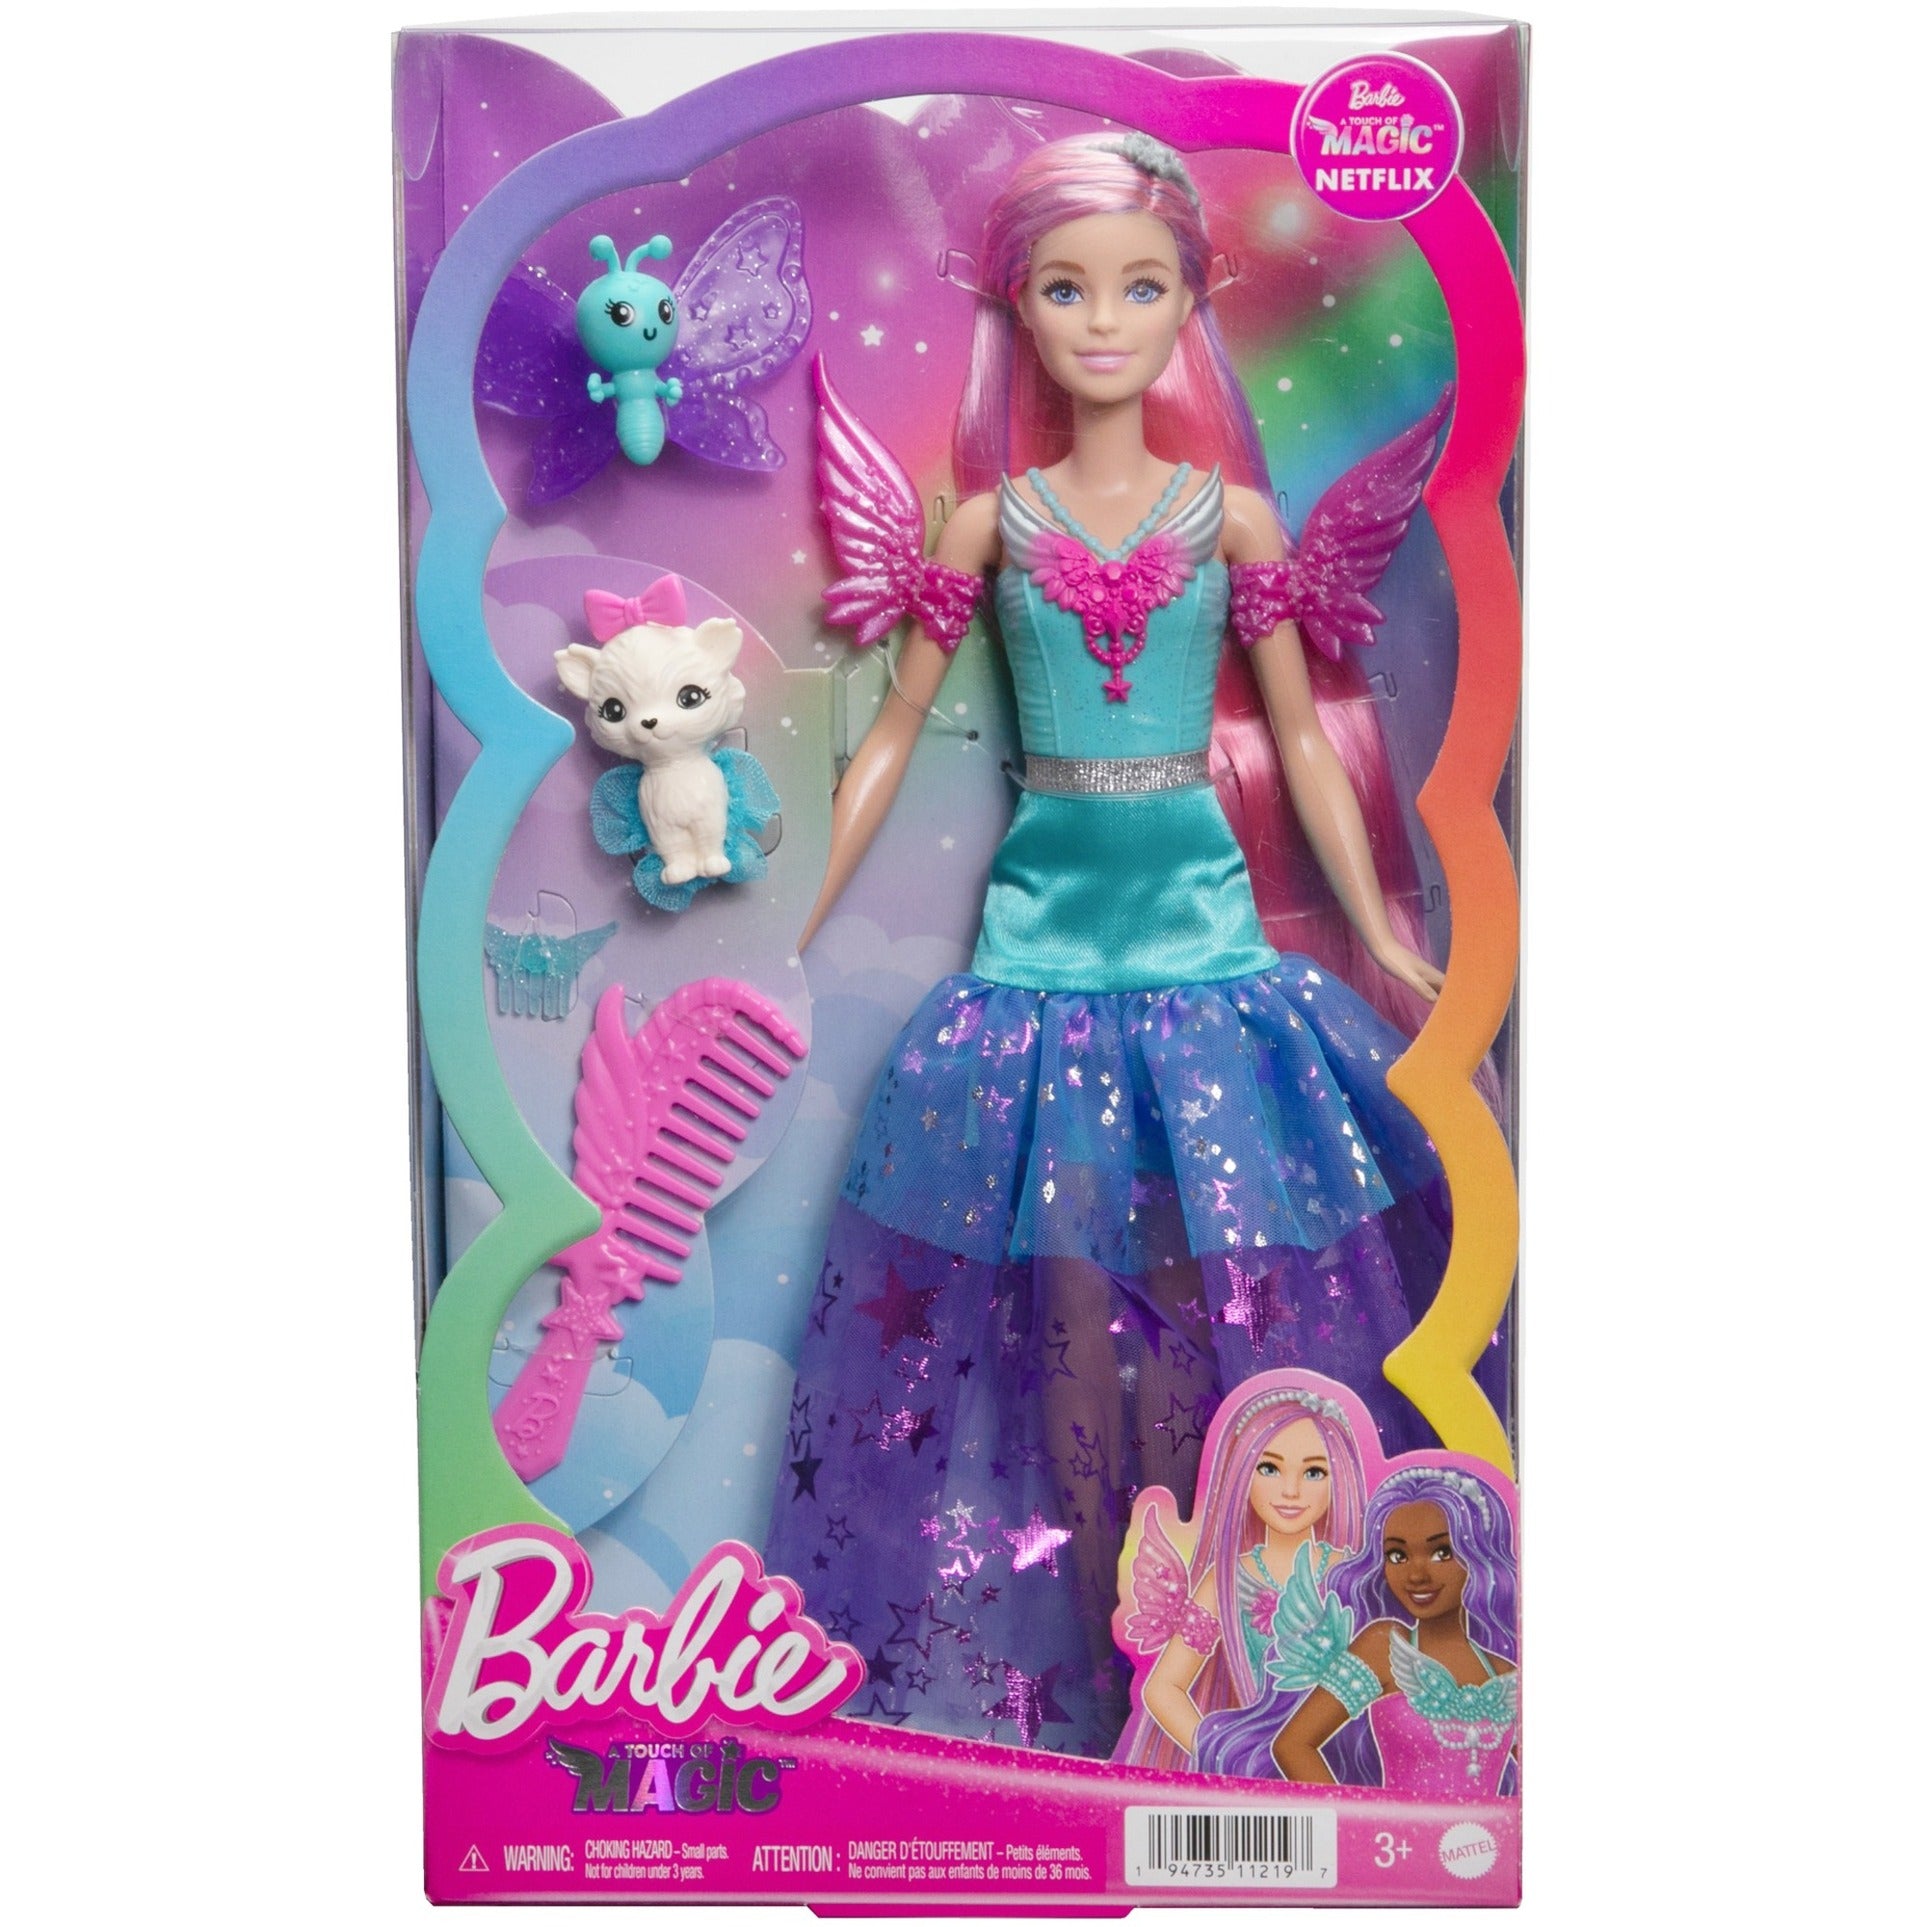 Barbie “Malibu” Doll from Barbie A Touch of Magic™ by Mattel -Mattel - India - www.superherotoystore.com